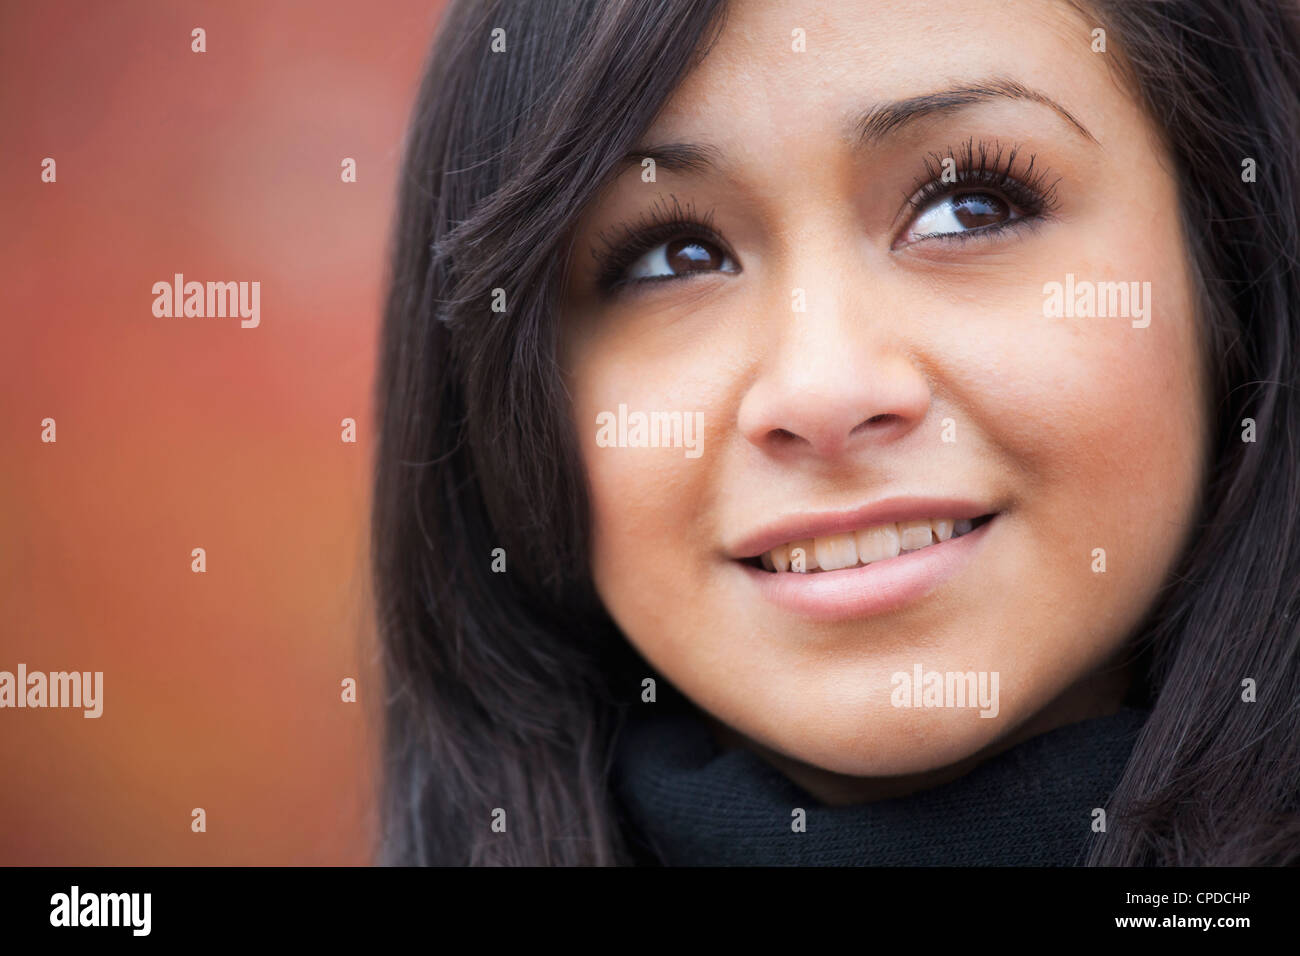 Smiling Hispanic teenager Banque D'Images